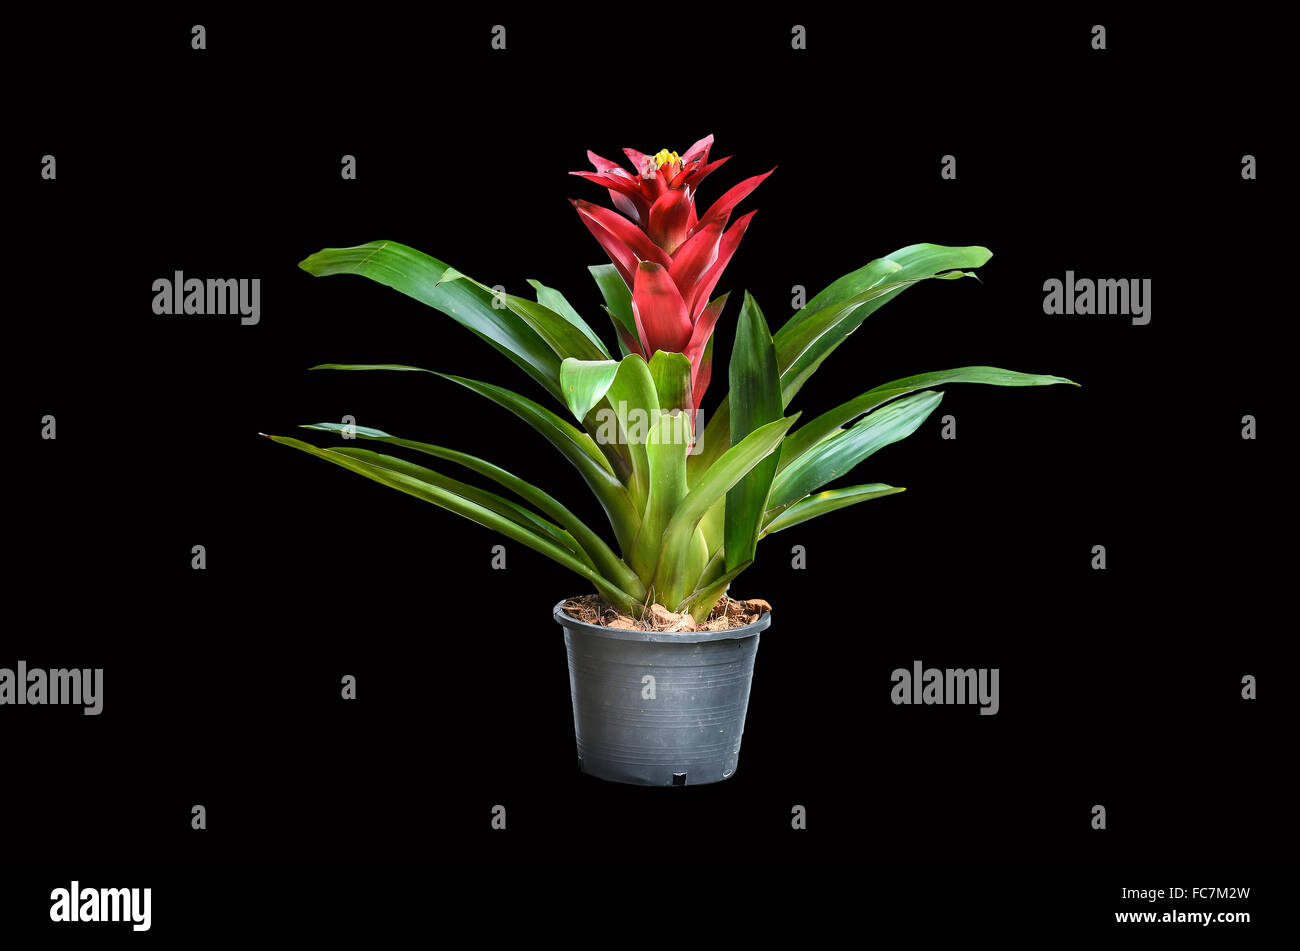 Blossoming plant of guzmania in plastic flowerpot on black background Stock Photo